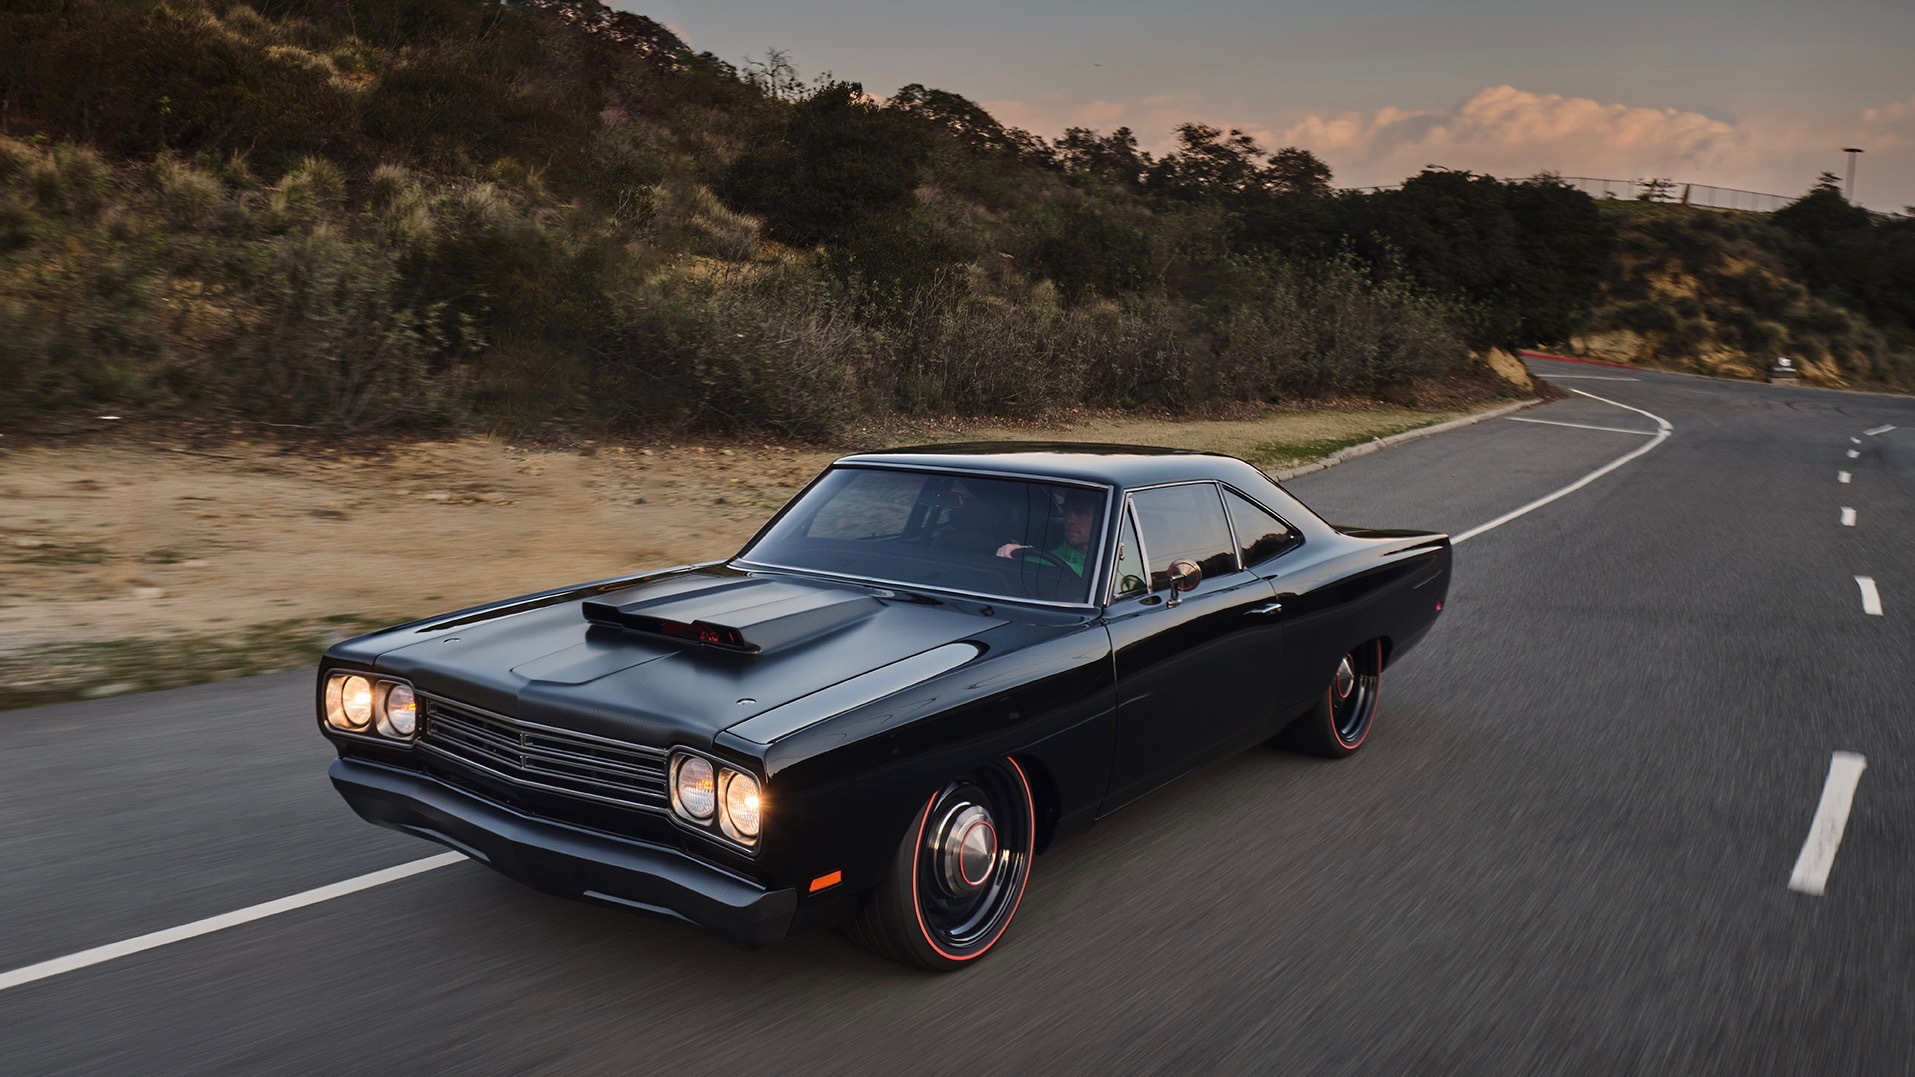 Kevin Hart's 1969 Plymouth Road Runner "Michael Meyers"